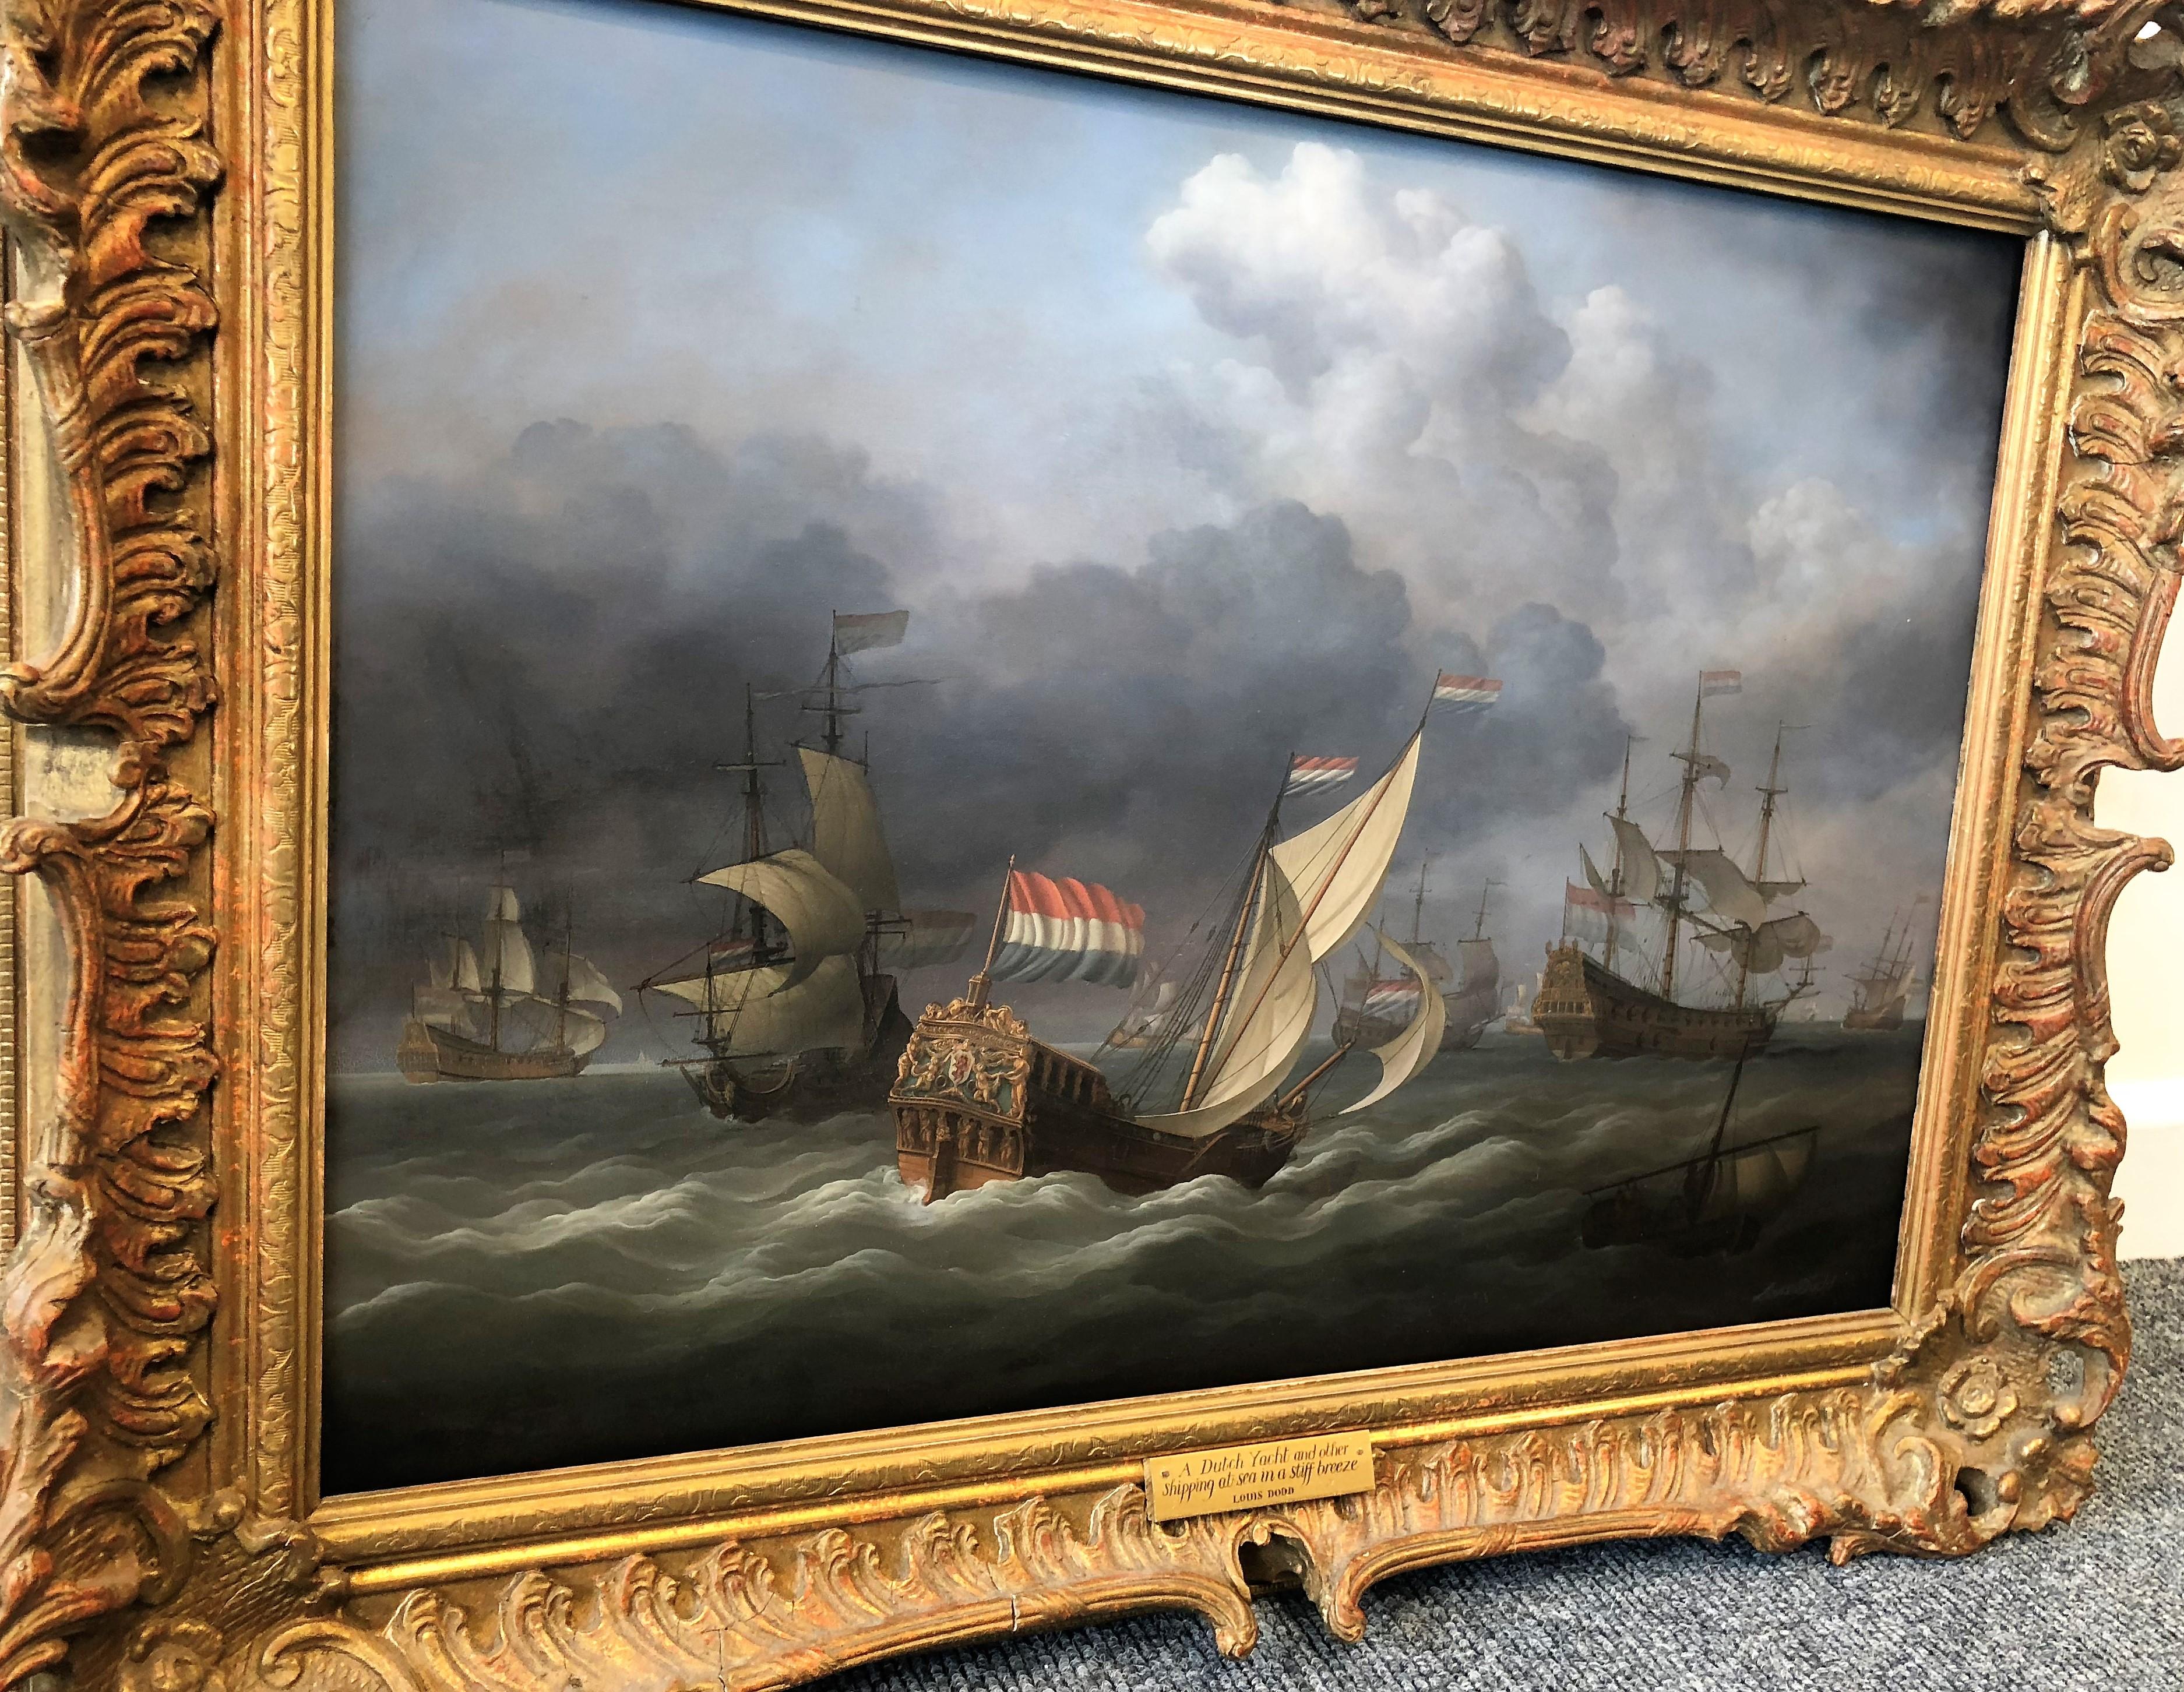 OIL PAINTING By LOUIS DODD 20th CENTURY NAVY / MARITIME PIECE GOLD GILT FRAME - Realist Painting by Louis Dodd